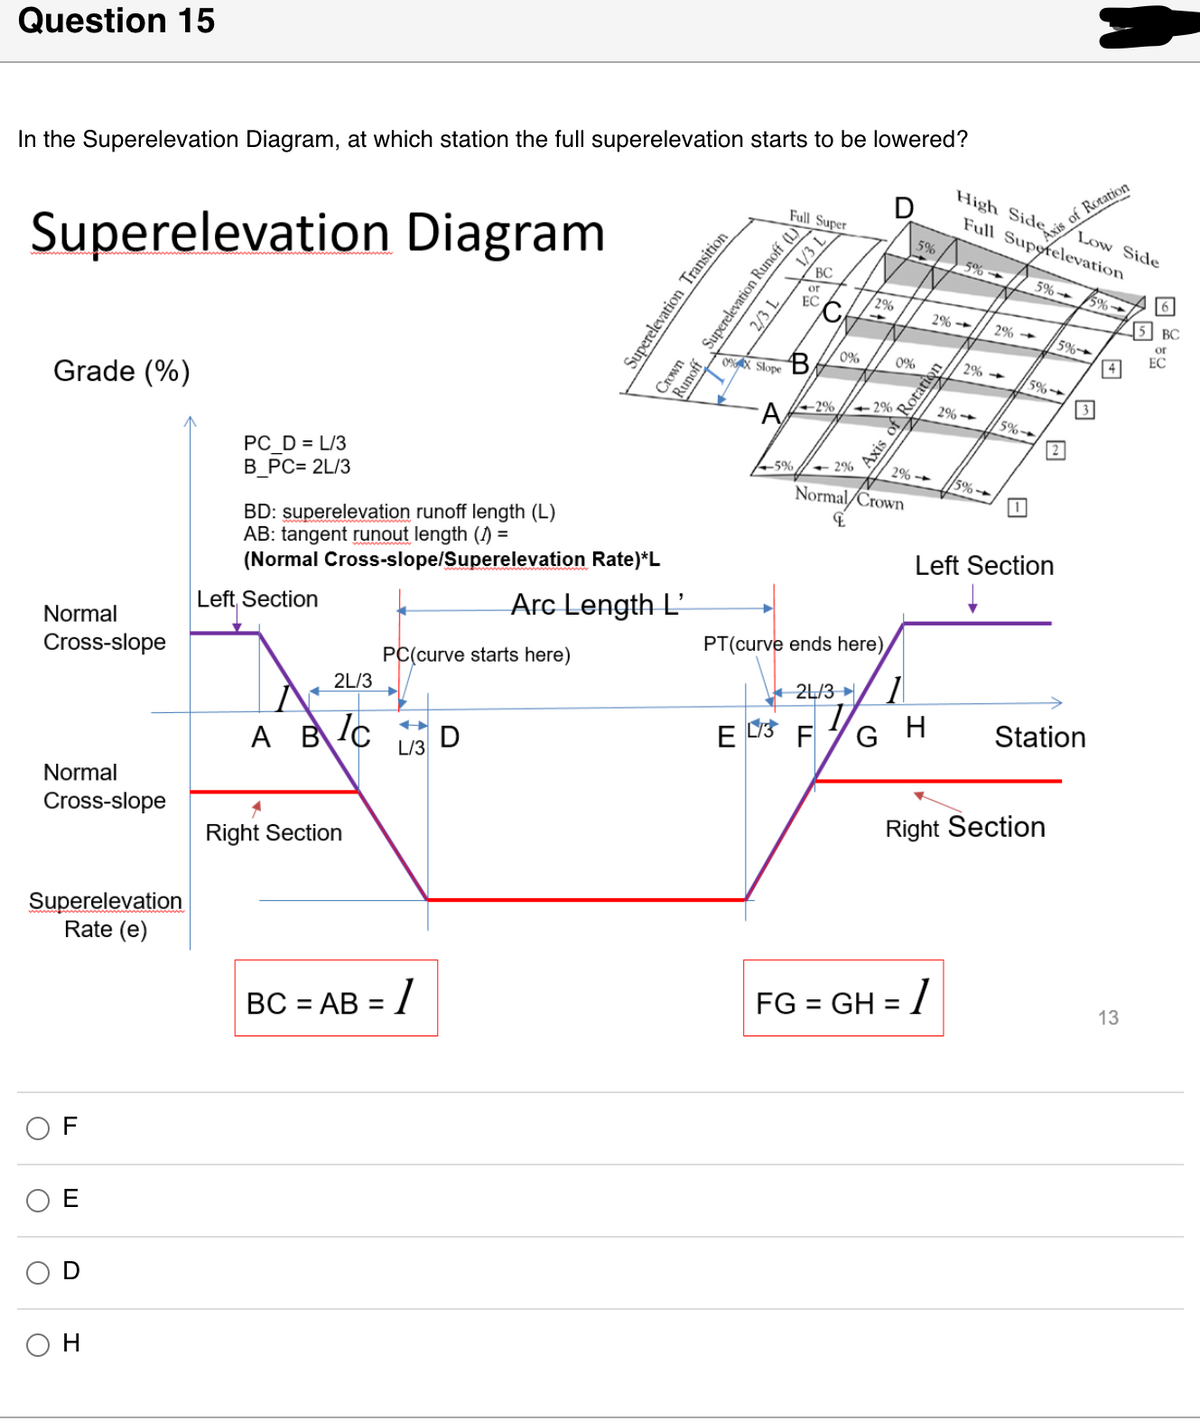 Question 15
In the Superelevation Diagram, at which station the full superelevation starts to be lowered?
Superelevation Diagram
Grade (%)
PC D = L/3
B_PC=2L/3
Superelevation Transition
Crown
Superelevation Runoff (L)
0% X Slope
2/3 L
1/3 L
BC
or
EC
D
High Side of Rotation
Full Superelevation
Low Side
5%
5%-
5%->
5%
BC
or
2%
2%-->>
2% ->
5%-
EC
821
4
B
0%
0%
A
2%
2%
Axis of Rotation
2%->
5%-
3
2%-->
5%-
2
2%-->
15%-
1
-5%
<- 2%
Normal
Cross-slope
BD: superelevation runoff length (L)
AB: tangent runout length (✓) =
Normal/Crown
(Normal Cross-slope/Superelevation Rate)*L
Left Section
Left, Section
Arc Length L'
PC(curve starts here)
PT(curve ends here)
2L/3
+
24/3 1
A BIC
D
L/3
E3
F
G
H
Station
Right Section
Right Section
Normal
Cross-slope
Superelevation
Rate (e)
F
E
D
Ι
BC = AB = 1
FG = GH =
1
13